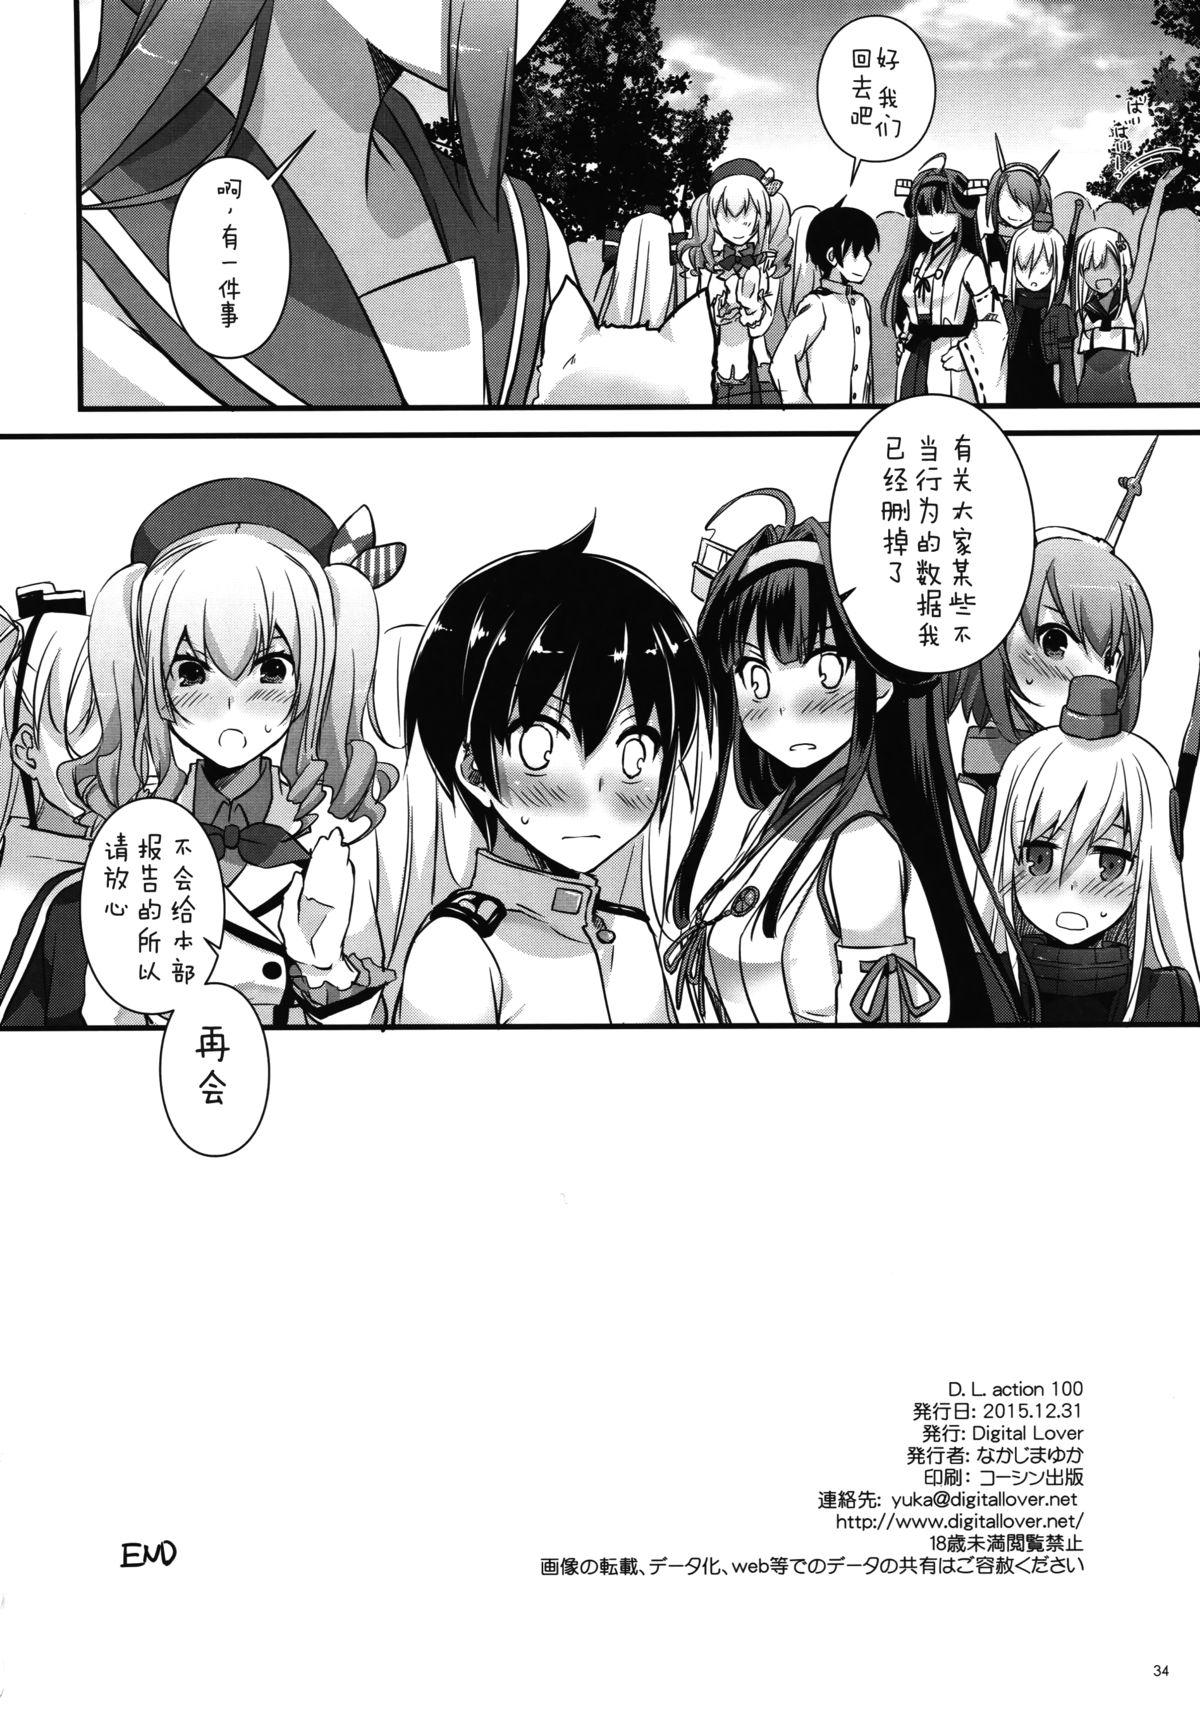 Gonzo D.L. action 100 - Kantai collection Gay Boyporn - Page 34